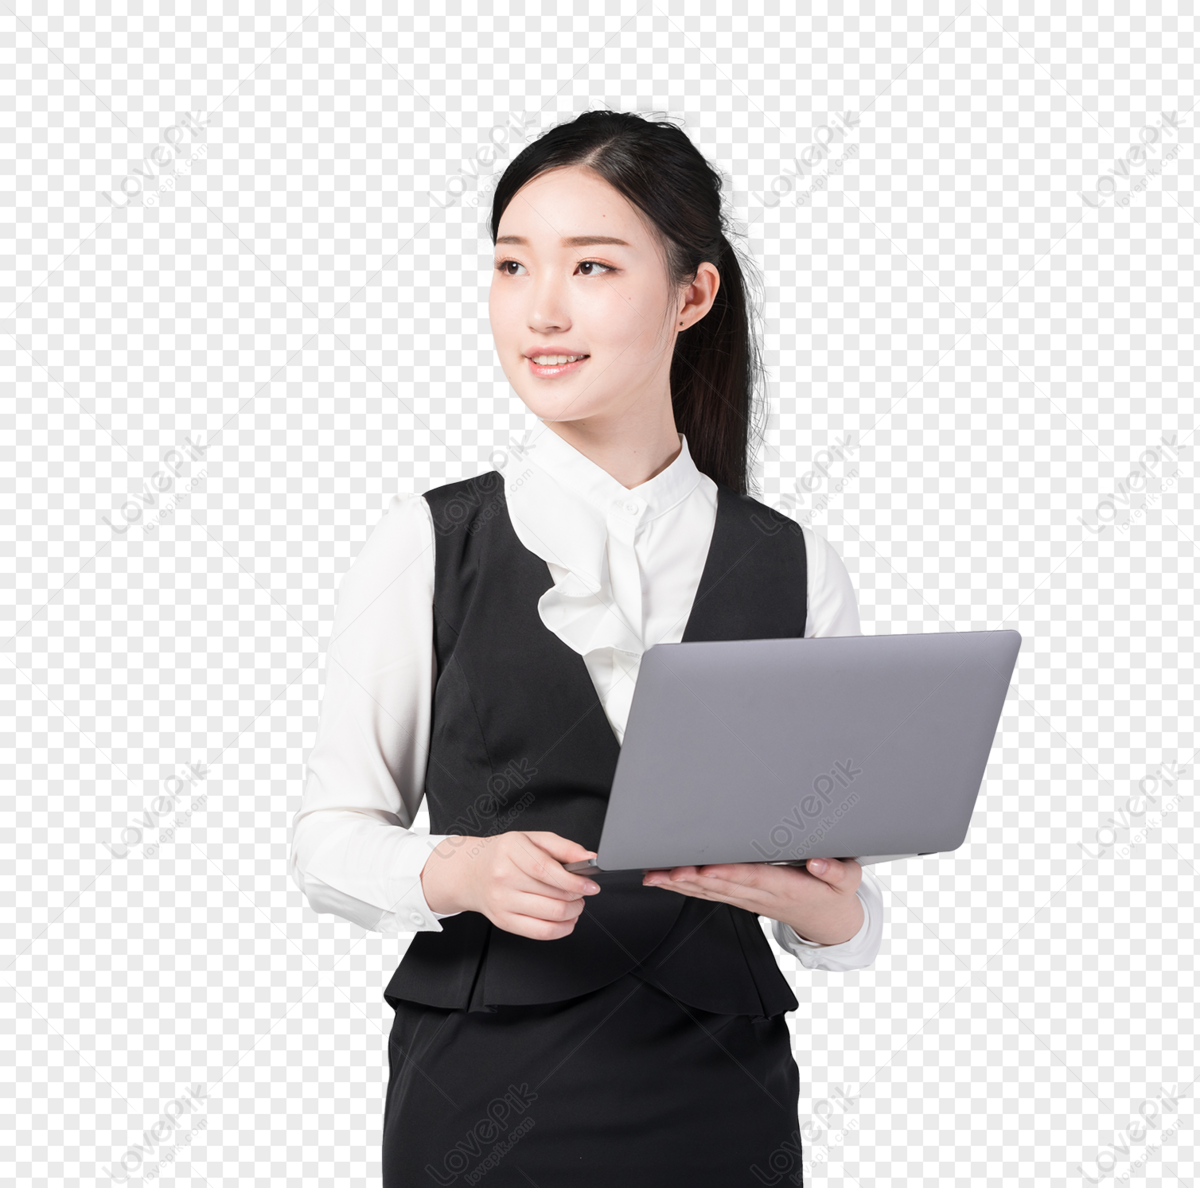 A picture of a woman in the workplace with a laptop computer, office staff, customer service, white-collar png transparent image